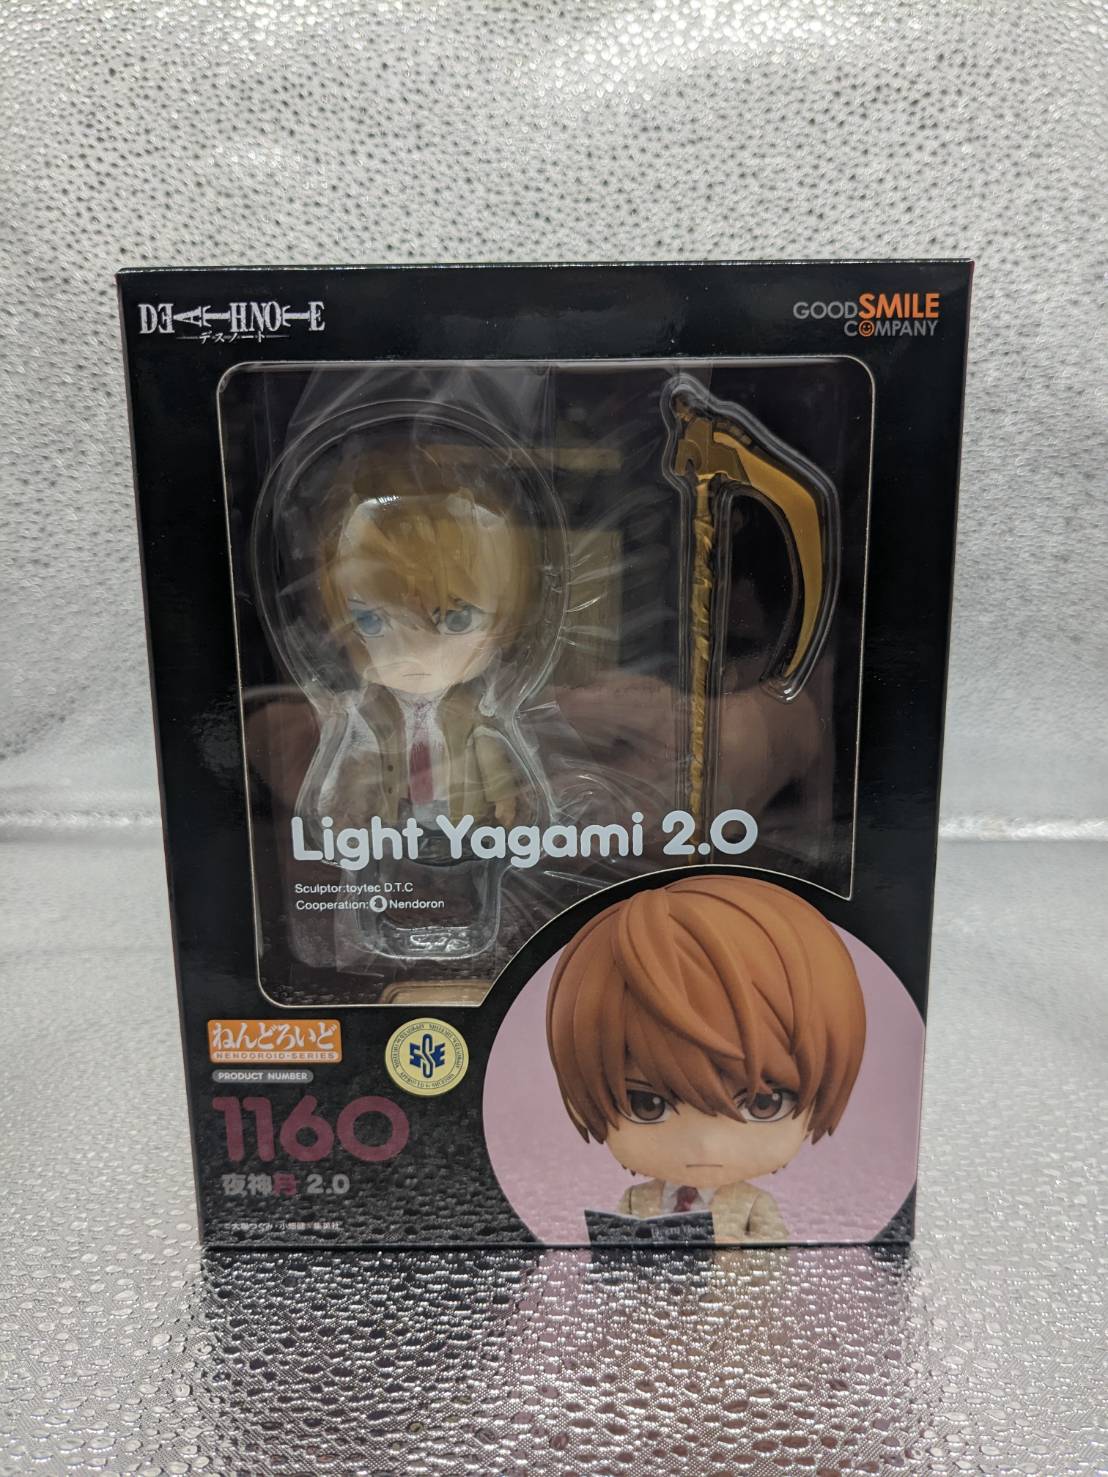 Death Note figures and goods